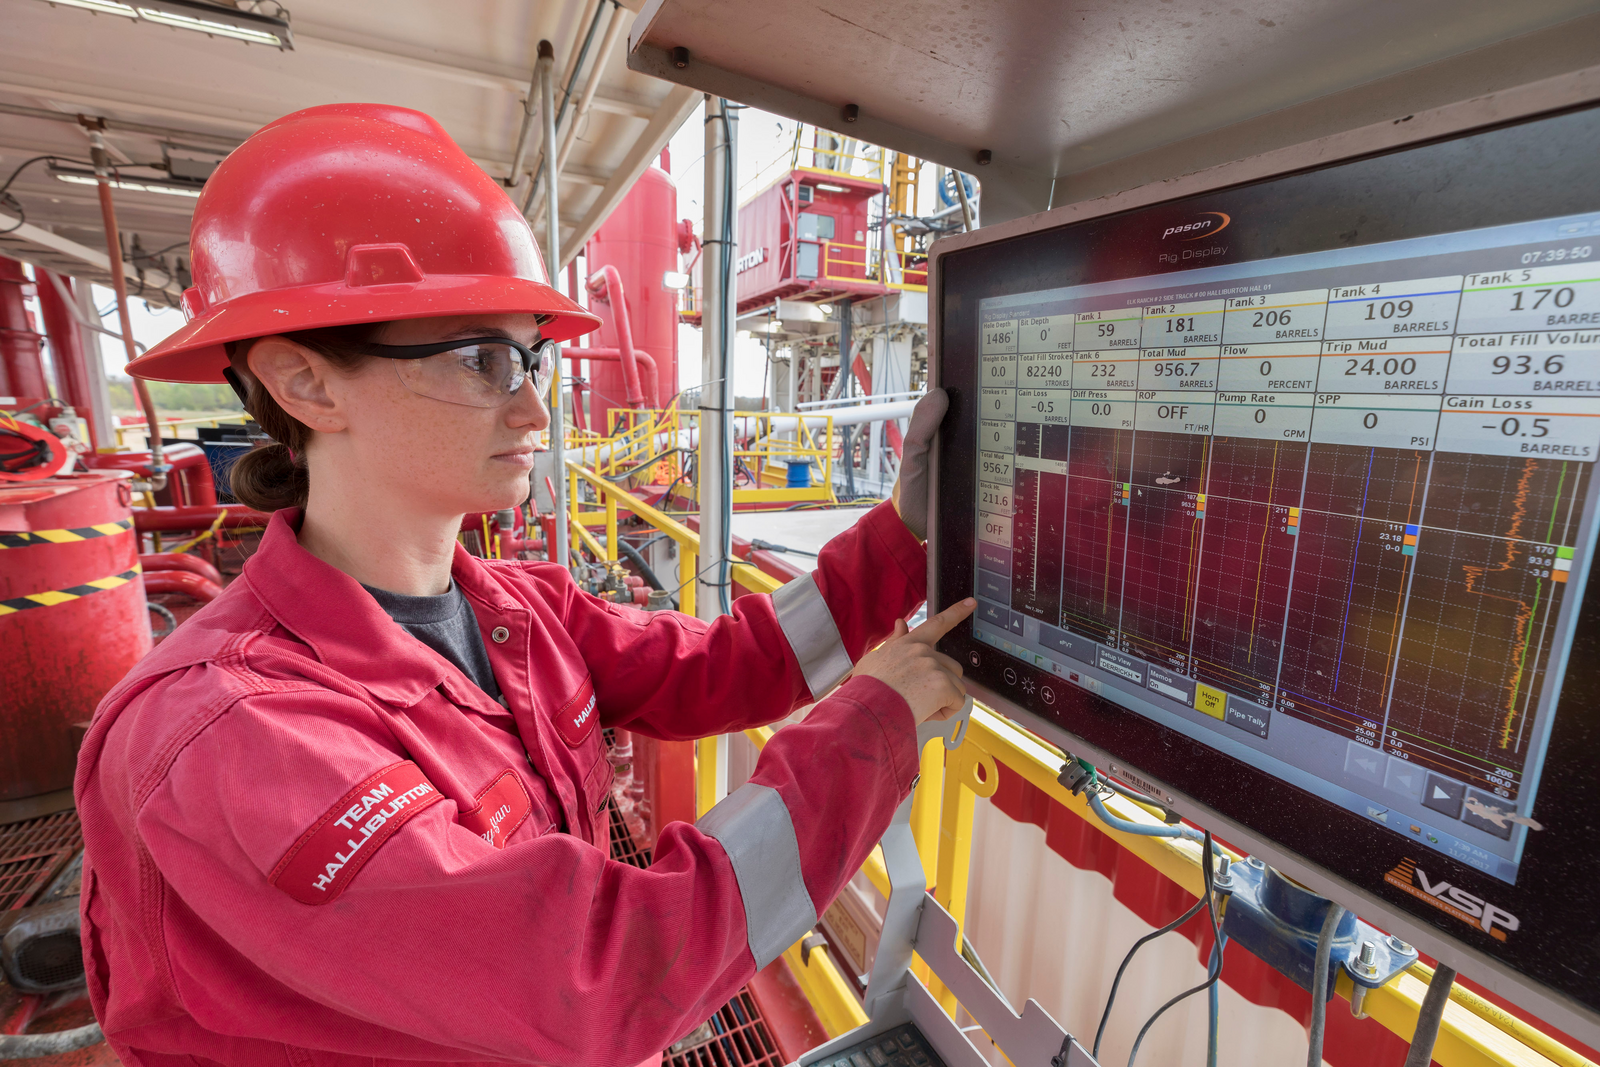 A halliburton engineer looking at the data on the screen